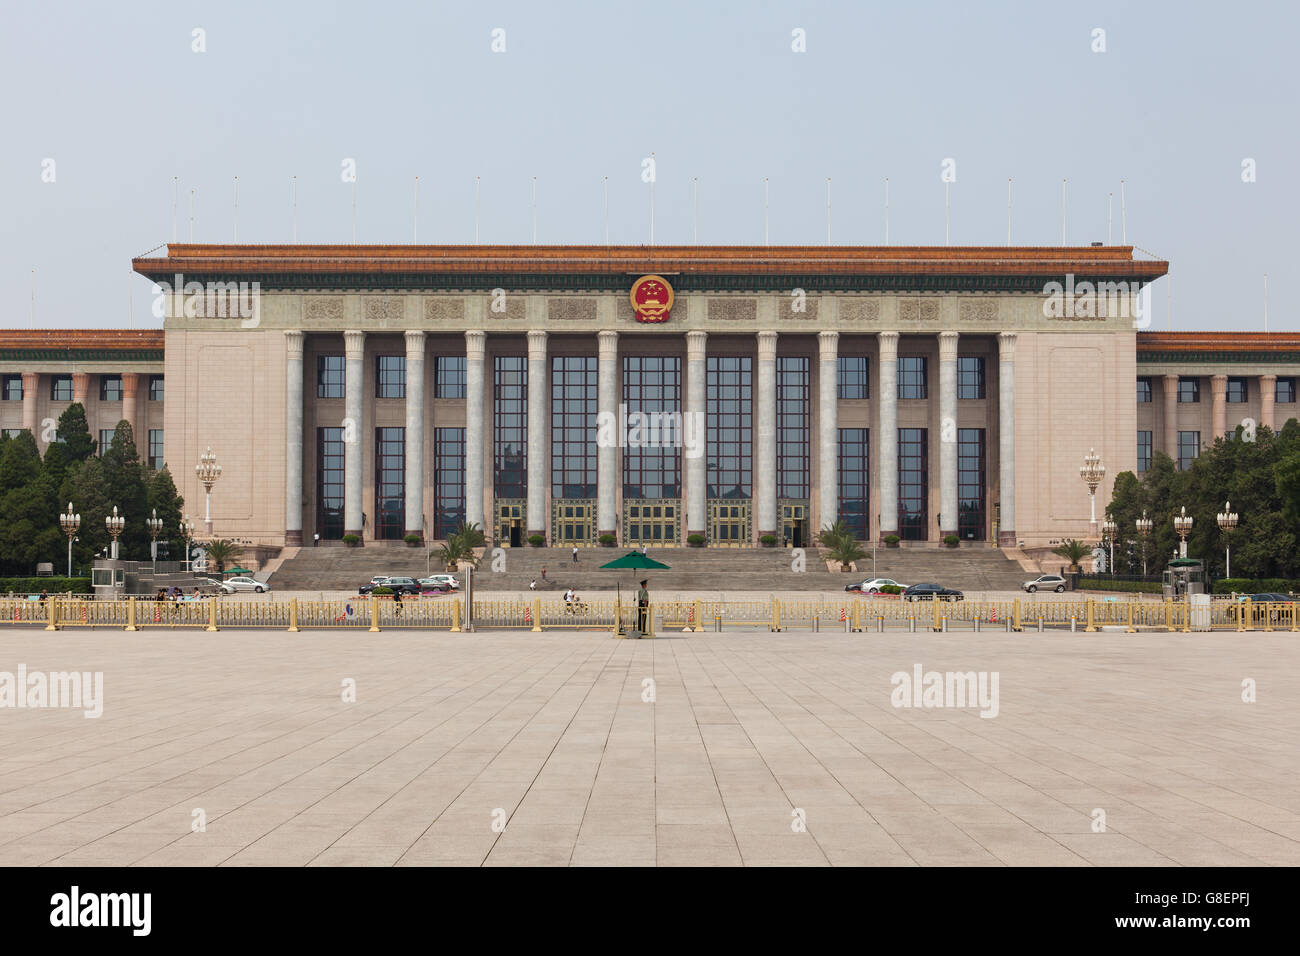 Beijing, China - Jun 20, 2016 : Front view of the Great hall of the people at the Tianmen square, Beijing. Stock Photo